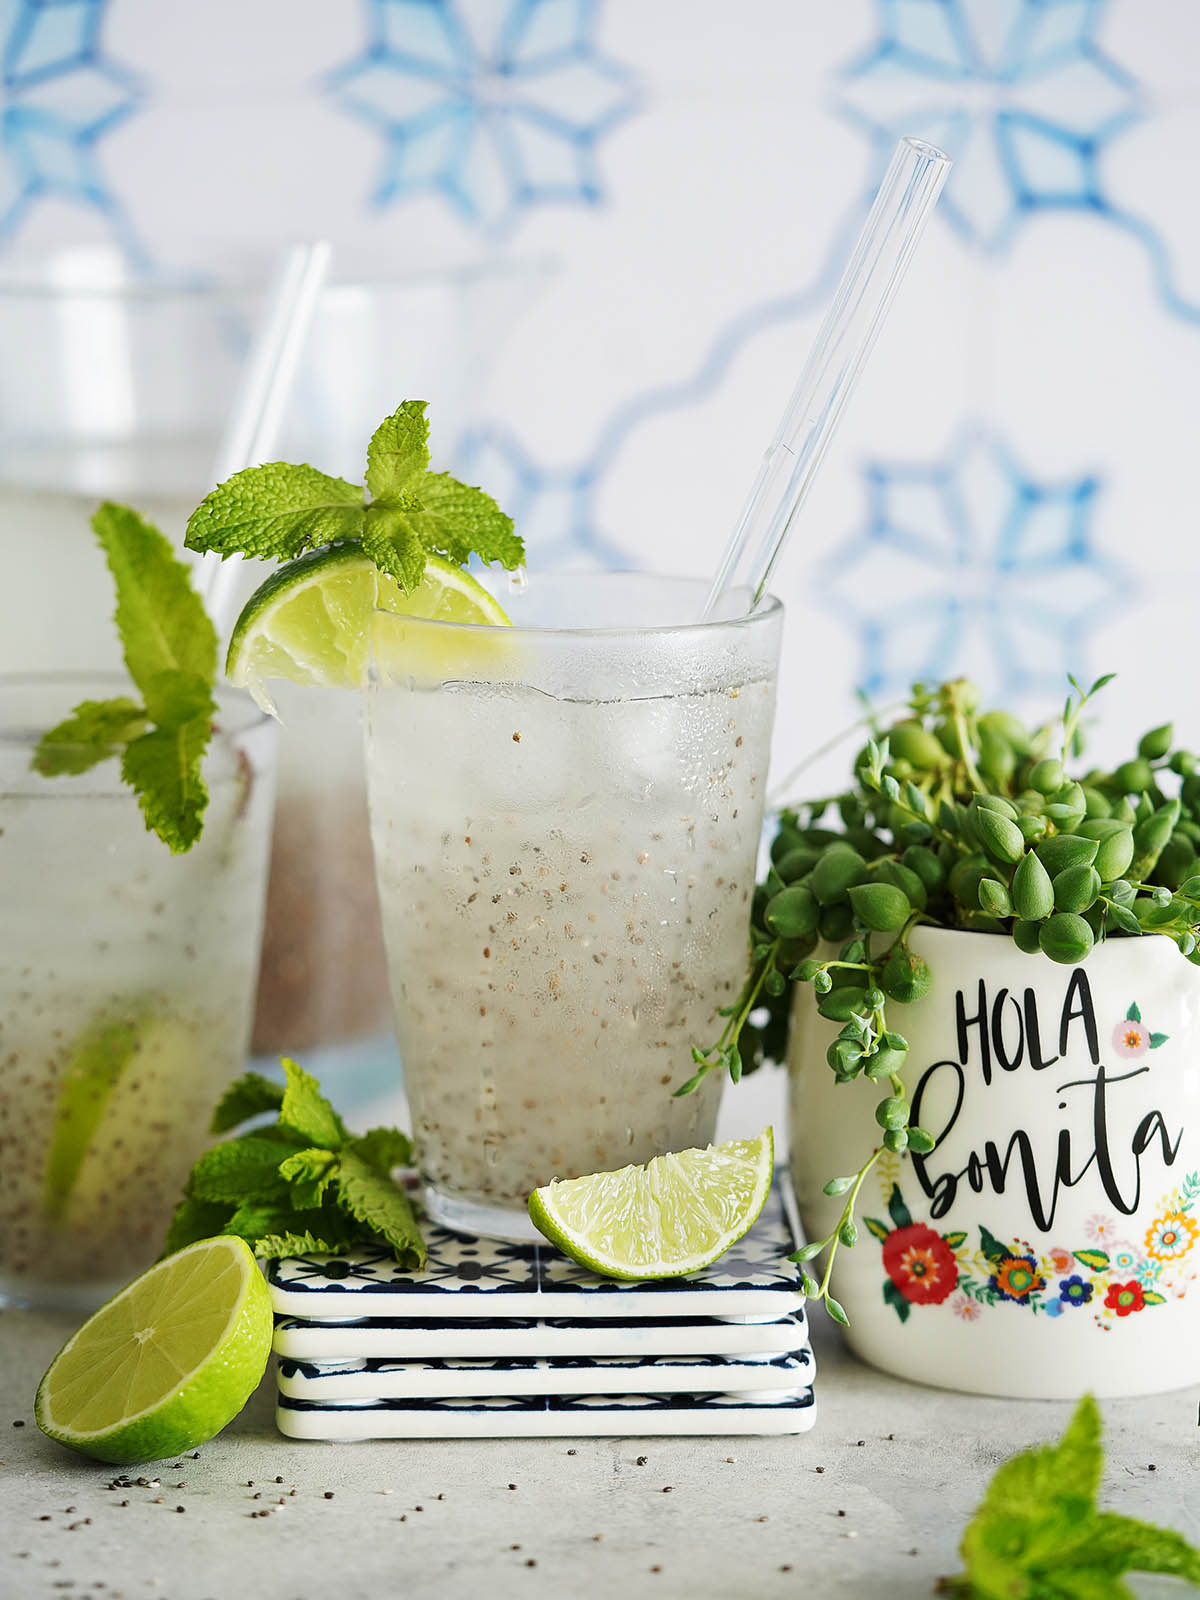 Agua Con Chia & Limon in 3 clear glasses filled with ice.